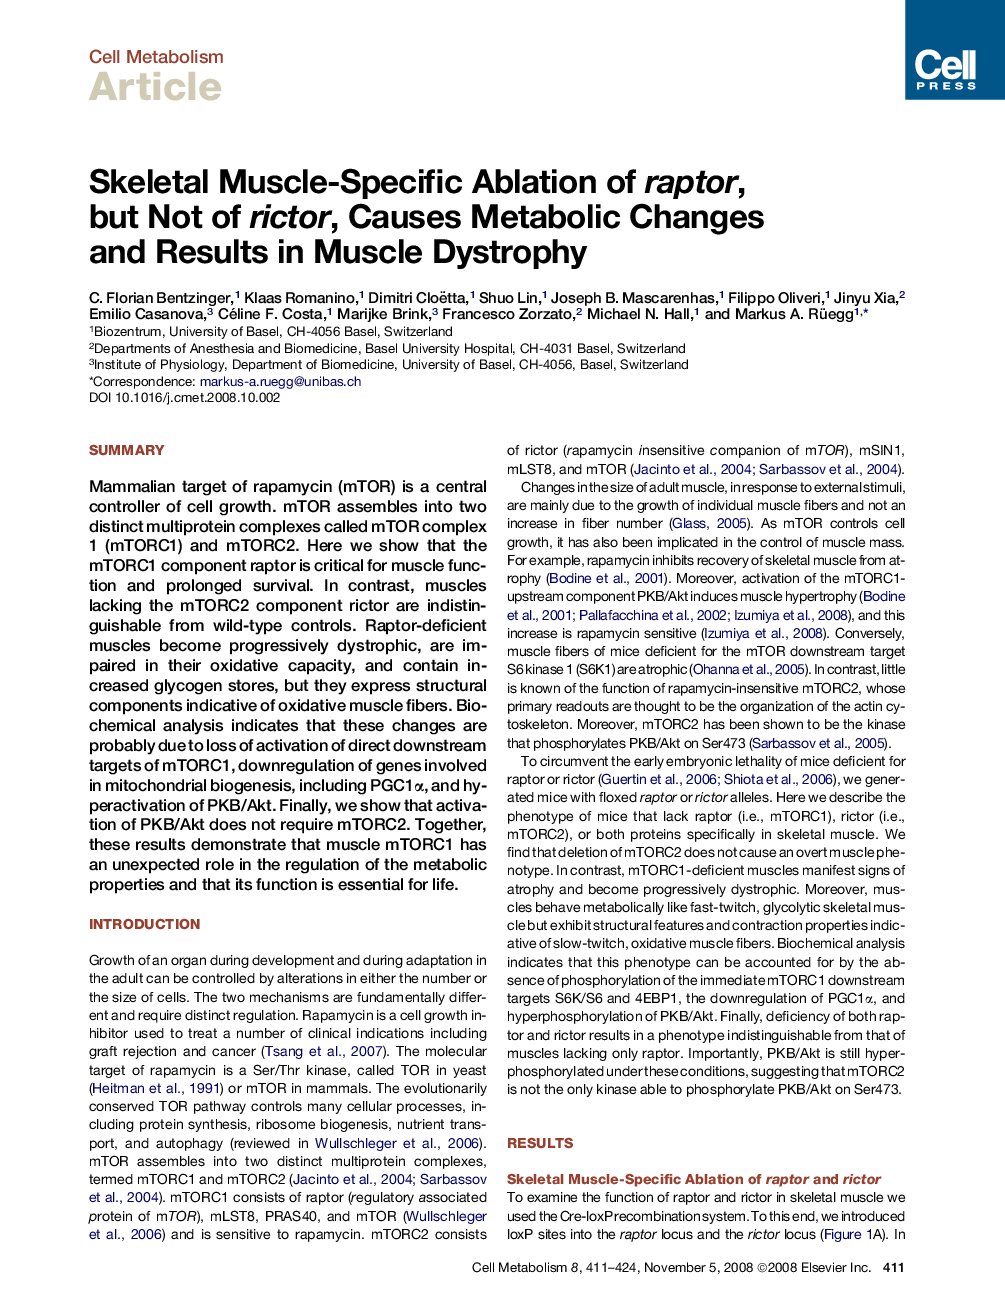 Skeletal Muscle-Specific Ablation of raptor, but Not of rictor, Causes Metabolic Changes and Results in Muscle Dystrophy